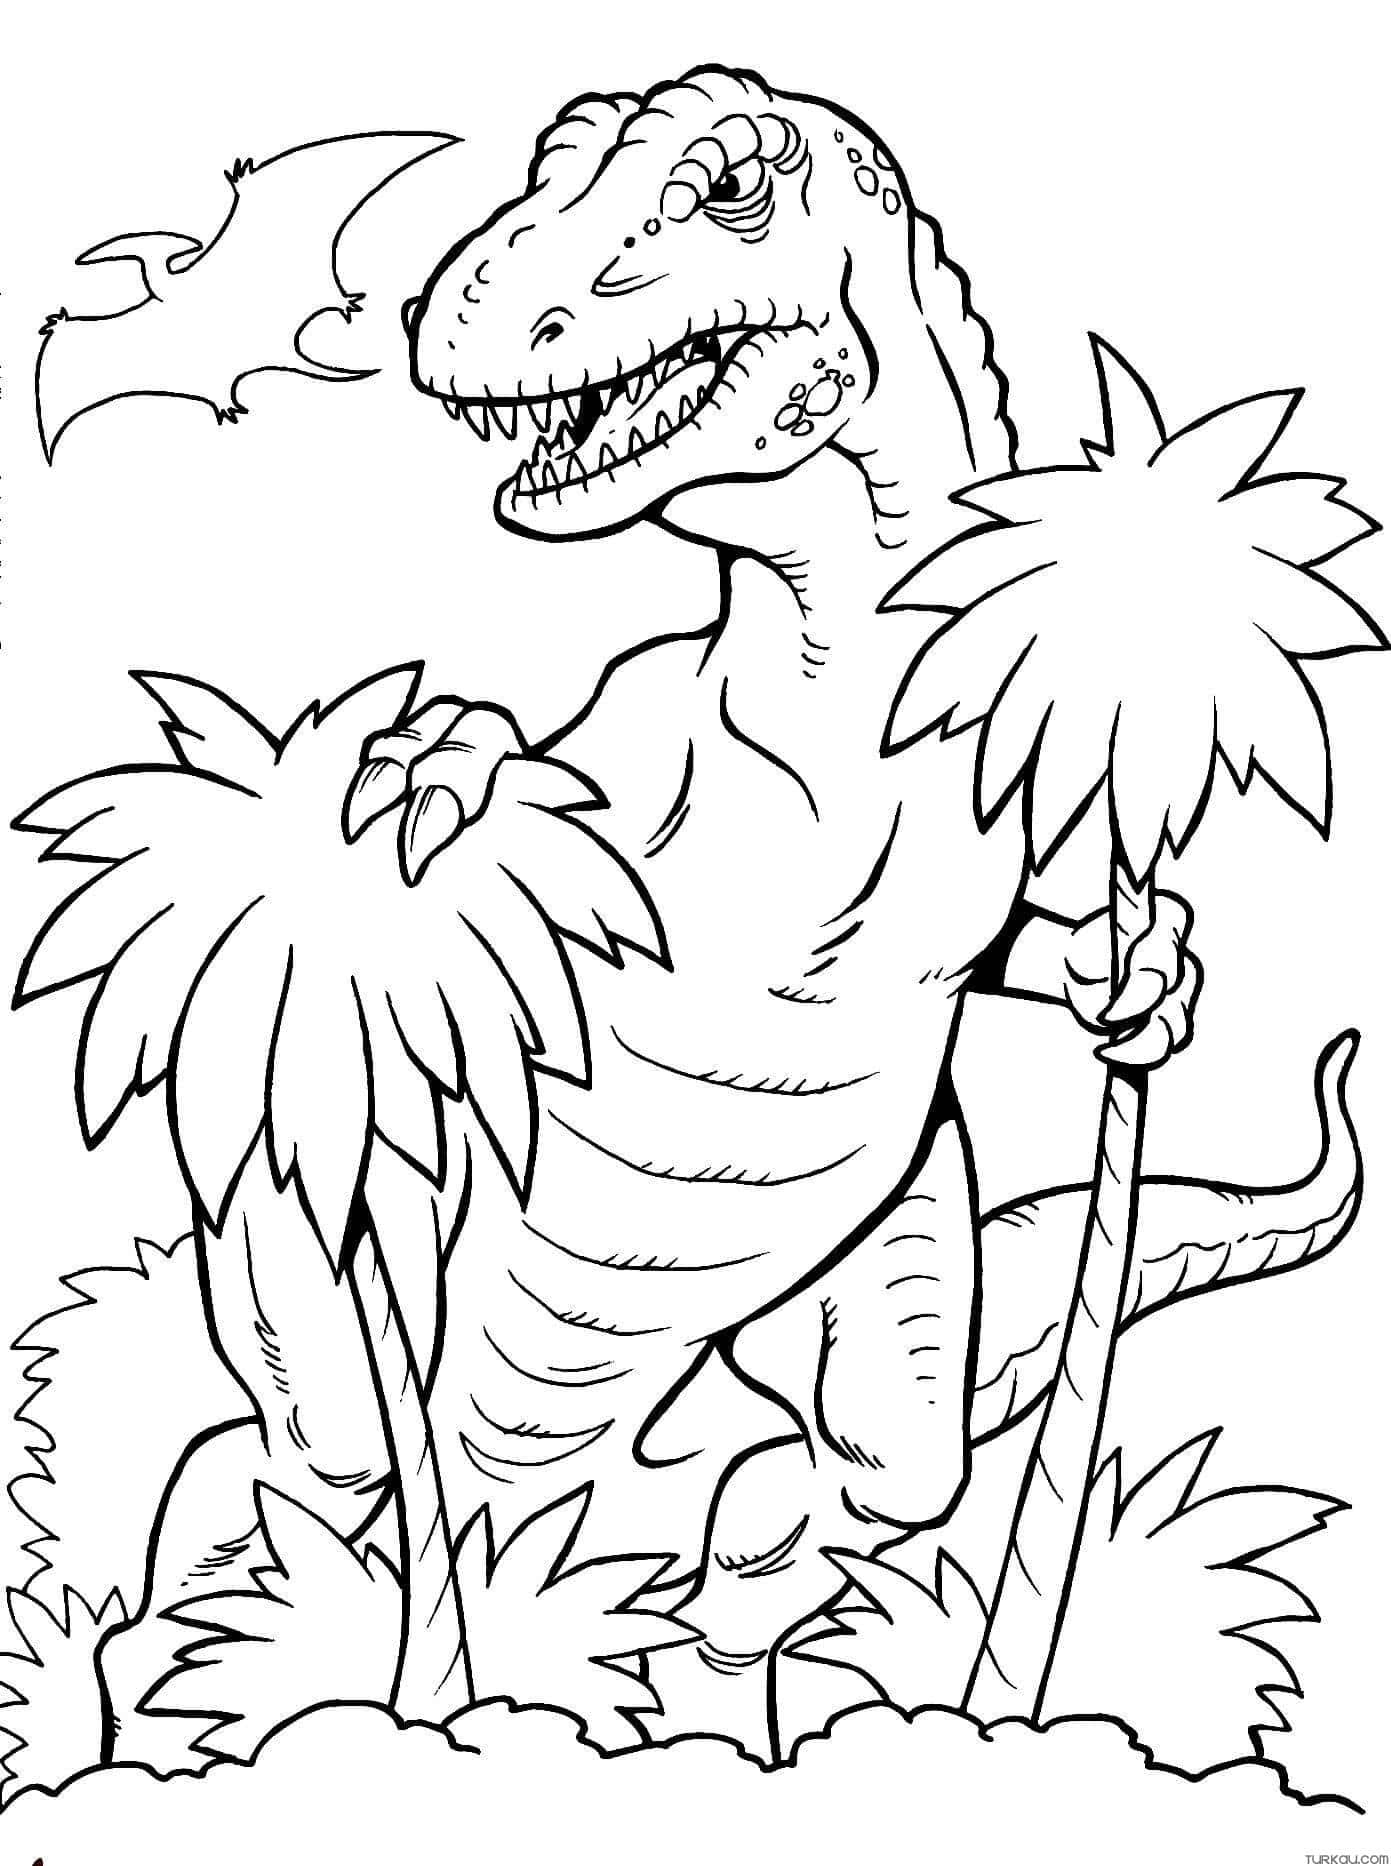 A Dinosaur Coloring Page With Palm Trees And Trees